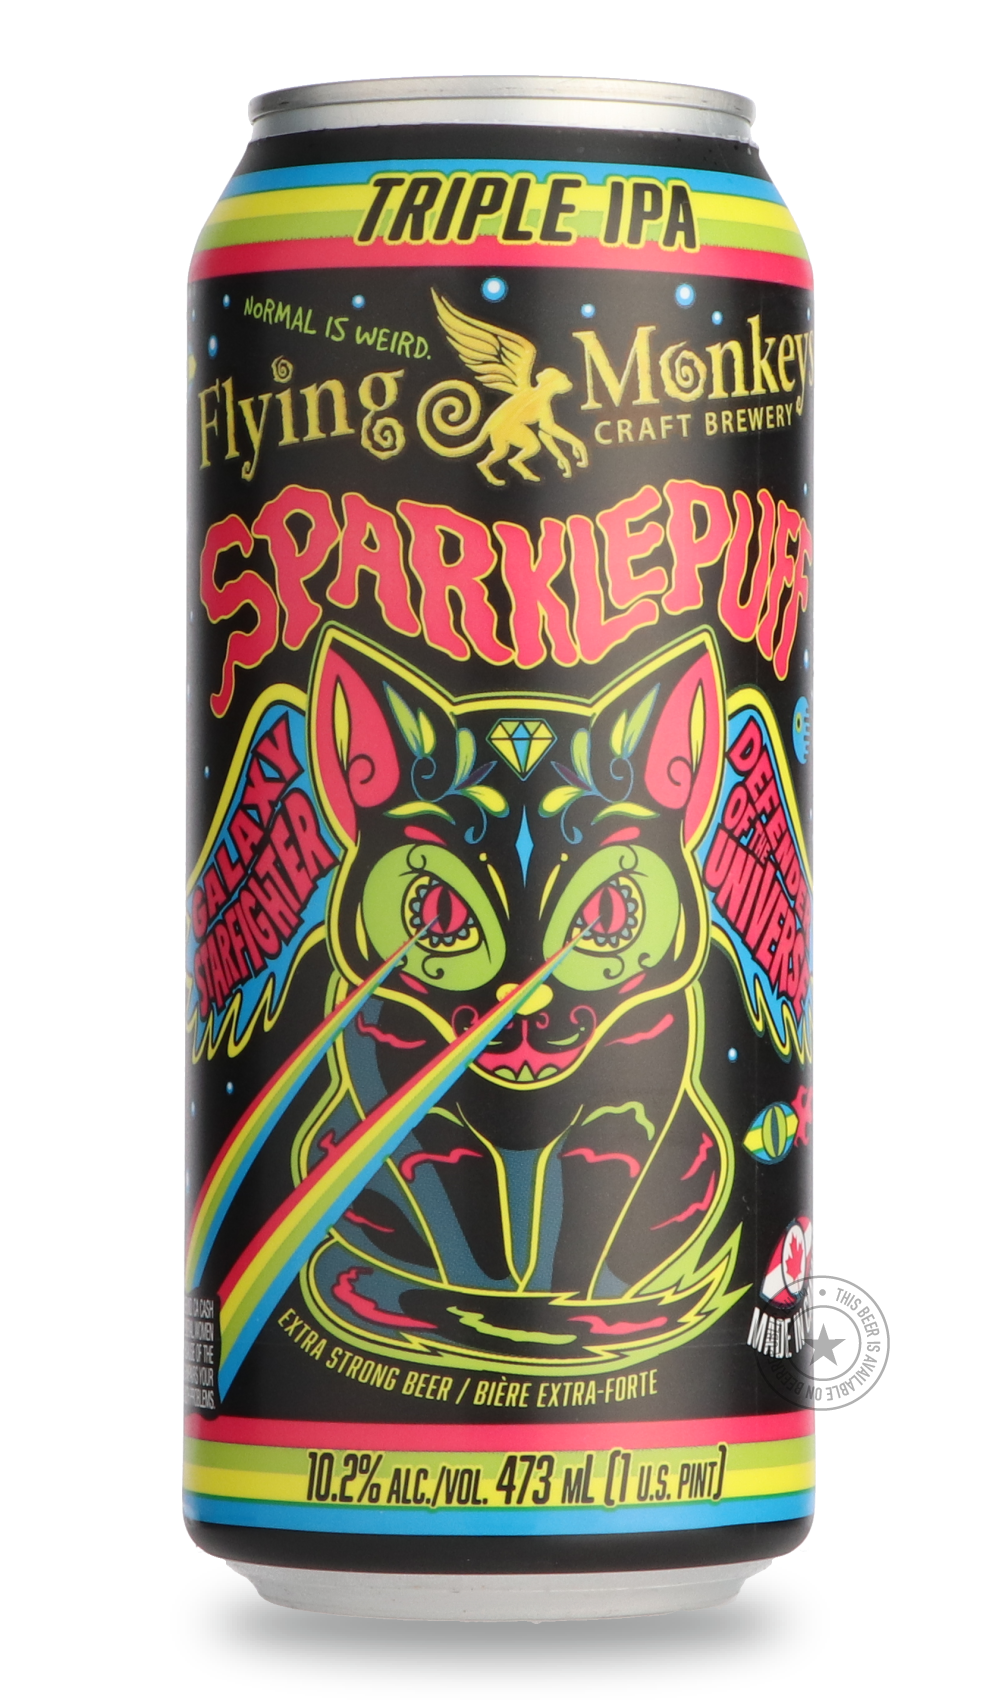 -Flying Monkeys- Sparklepuff Galaxy Starfighter Defender of the Universe-IPA- Only @ Beer Republic - The best online beer store for American & Canadian craft beer - Buy beer online from the USA and Canada - Bier online kopen - Amerikaans bier kopen - Craft beer store - Craft beer kopen - Amerikanisch bier kaufen - Bier online kaufen - Acheter biere online - IPA - Stout - Porter - New England IPA - Hazy IPA - Imperial Stout - Barrel Aged - Barrel Aged Imperial Stout - Brown - Dark beer - Blond - Blonde - Pil